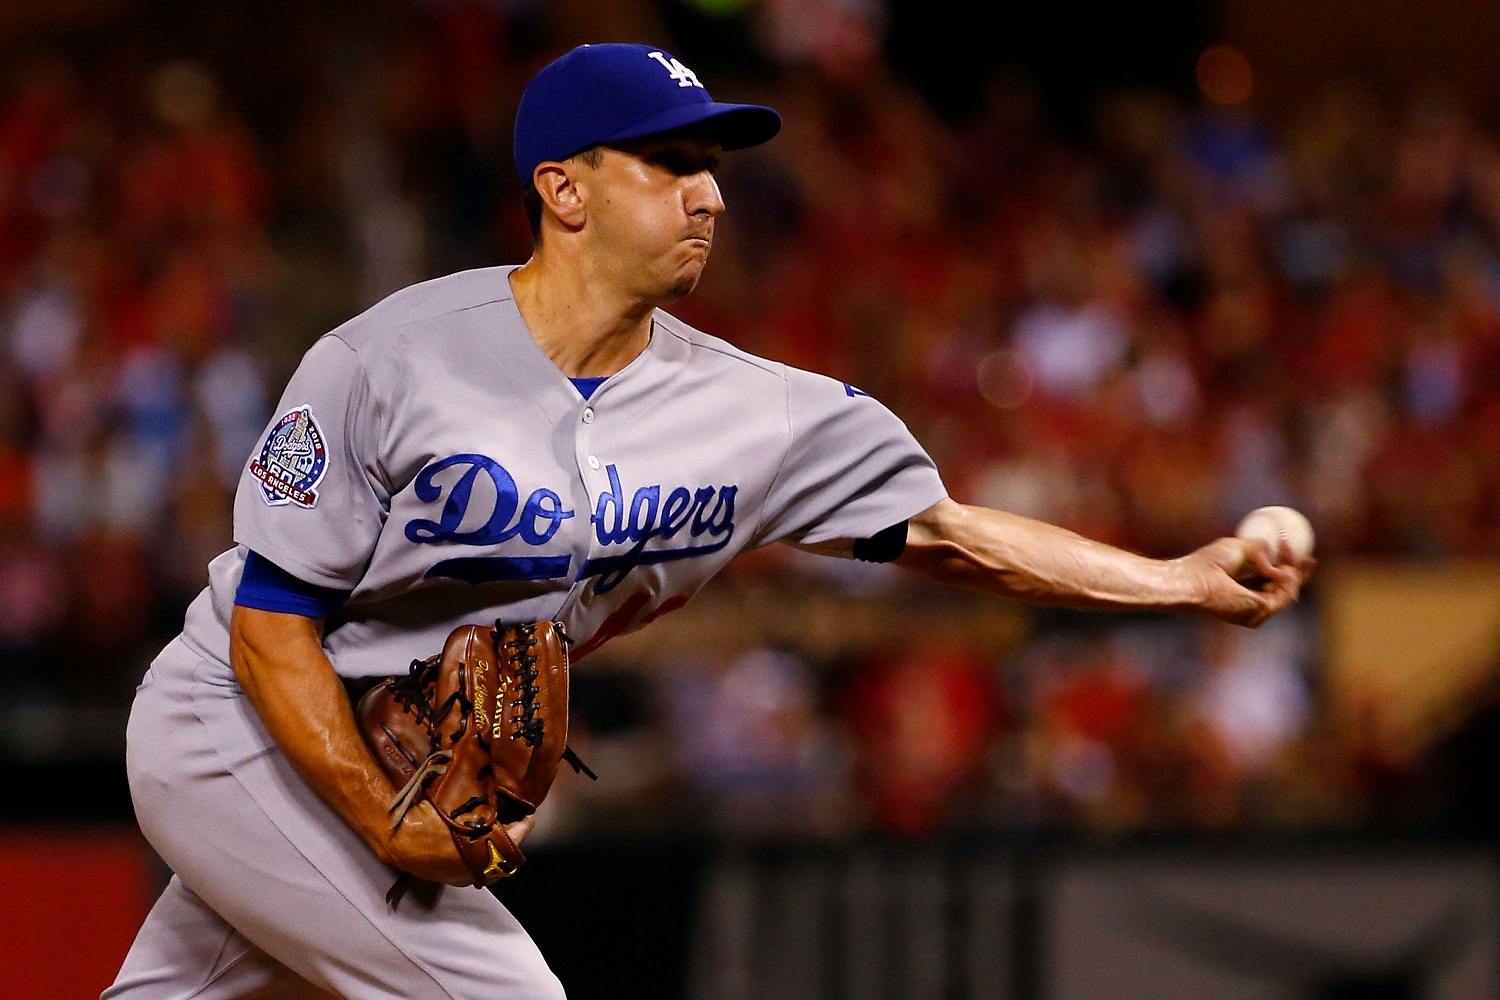 What Happened to Ambidextrous MLB Pitcher Pat Venditte?